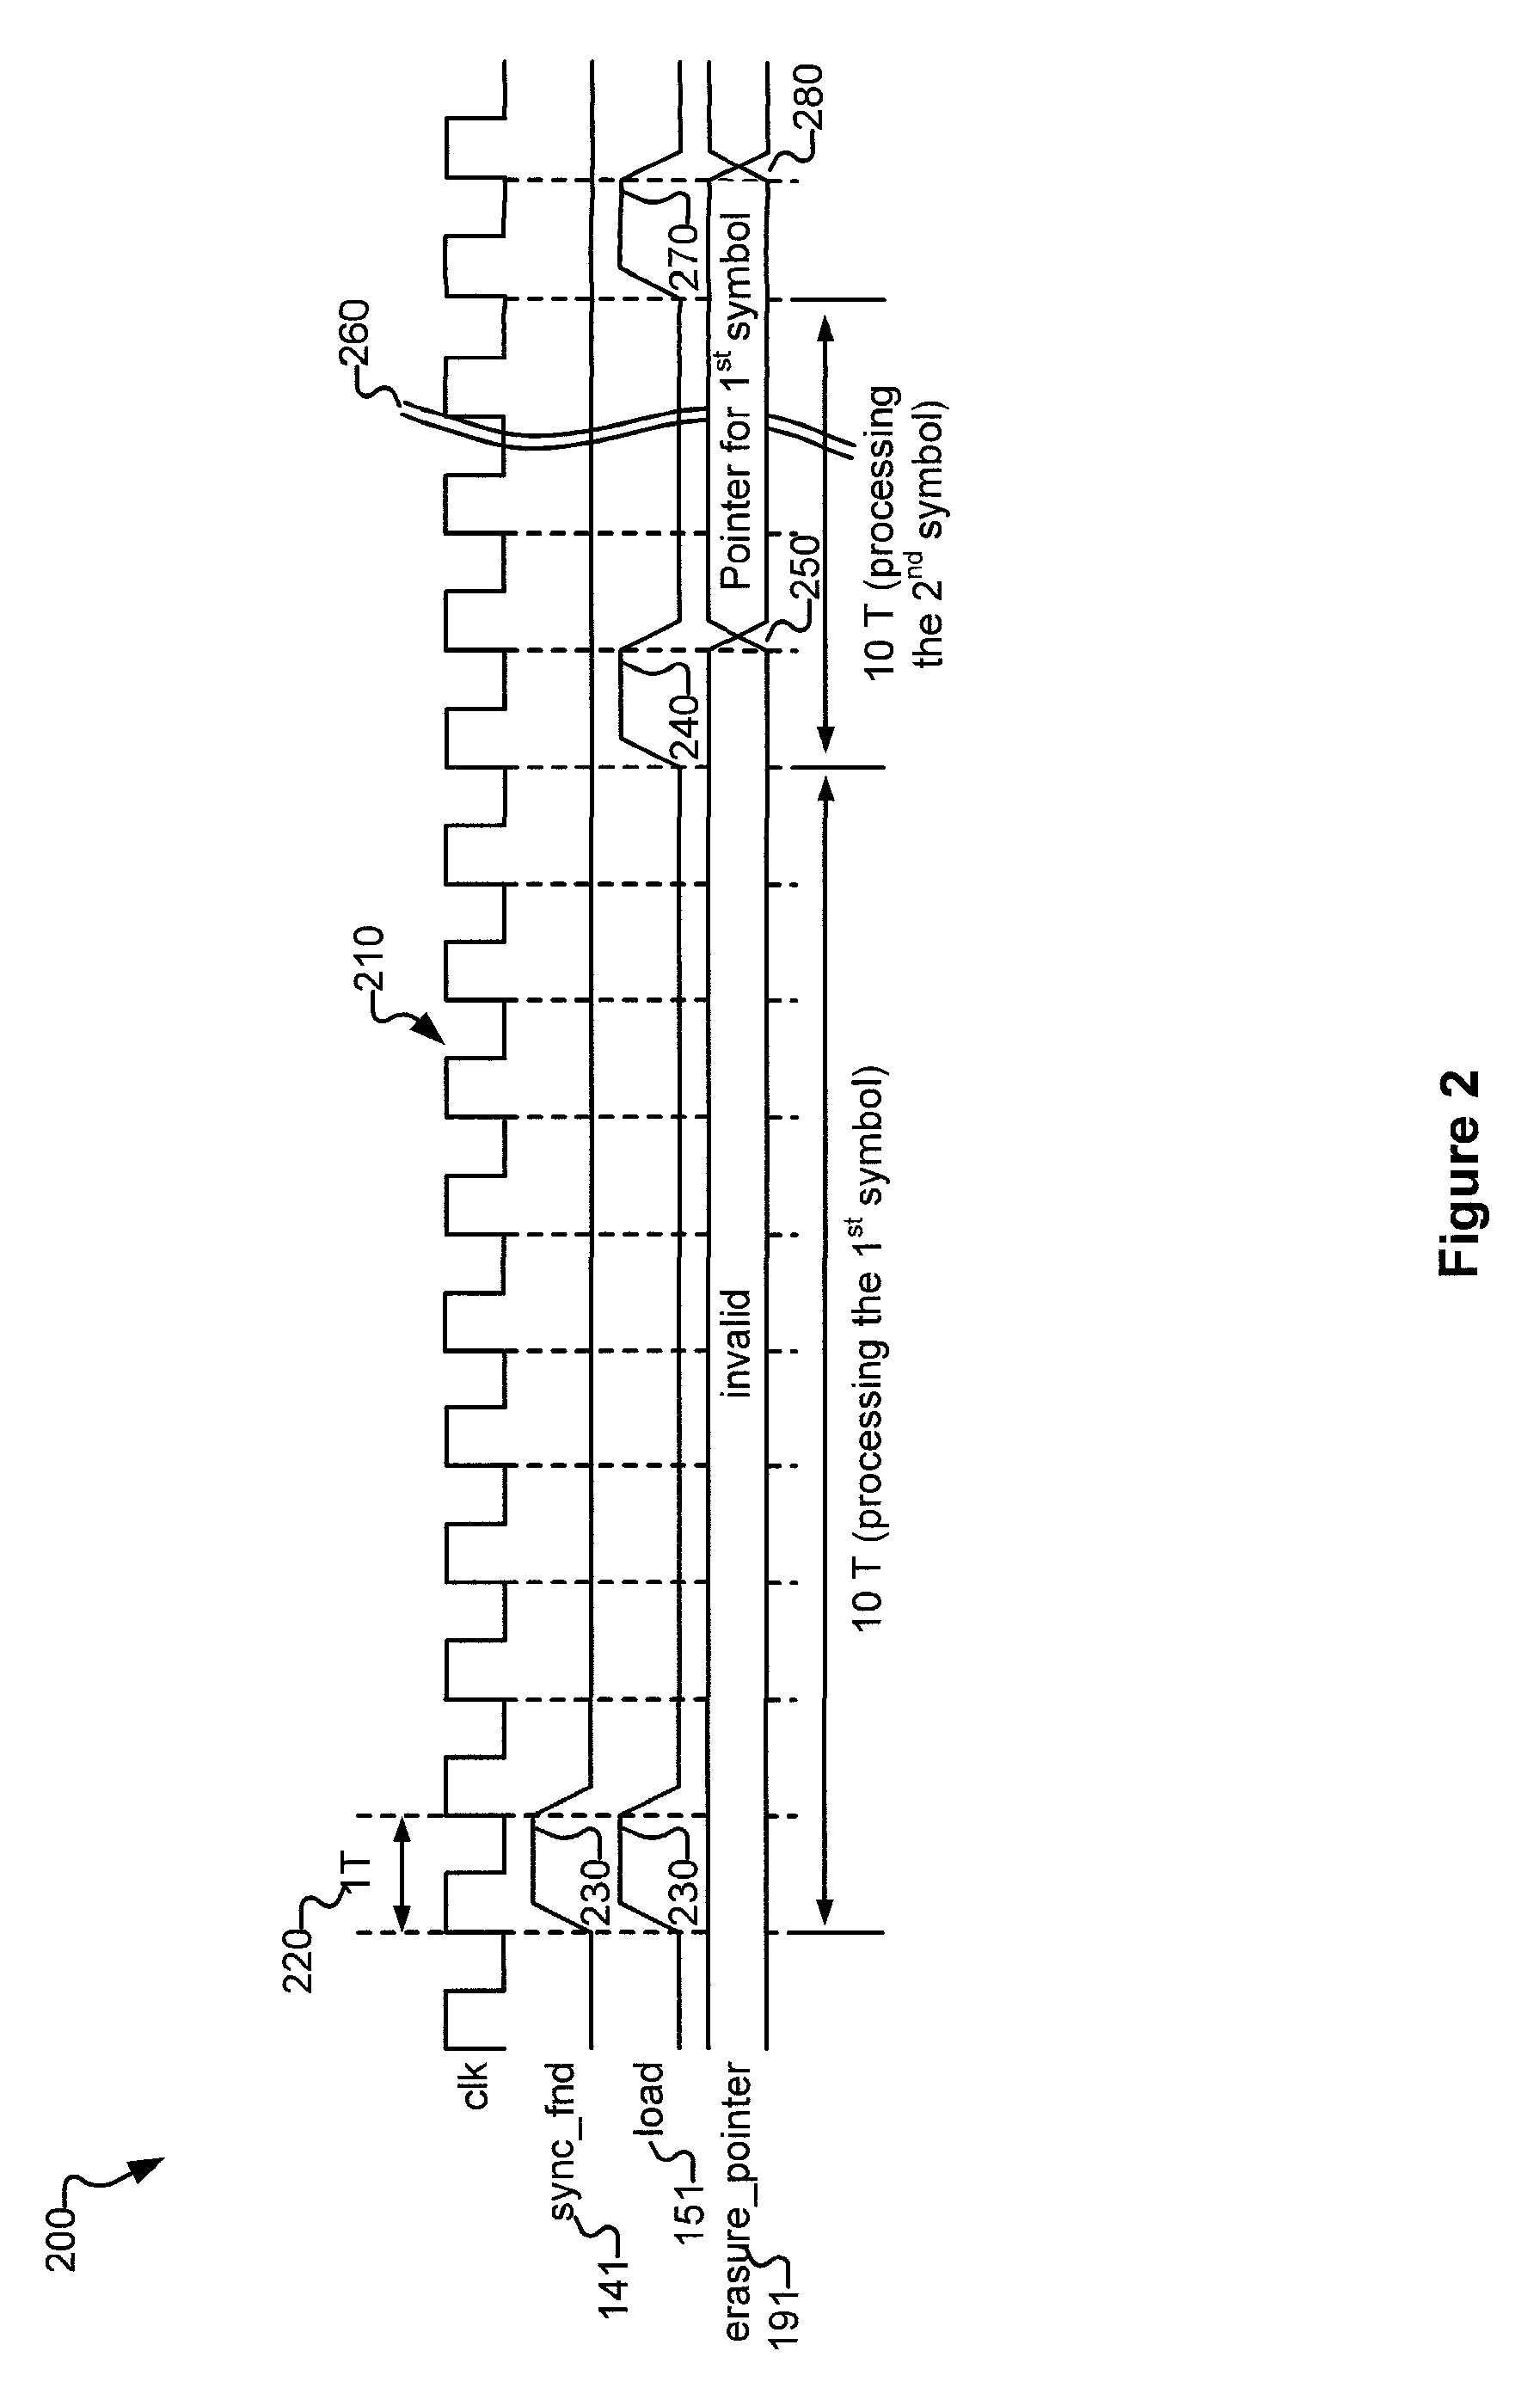 Systems and methods for generating erasure flags